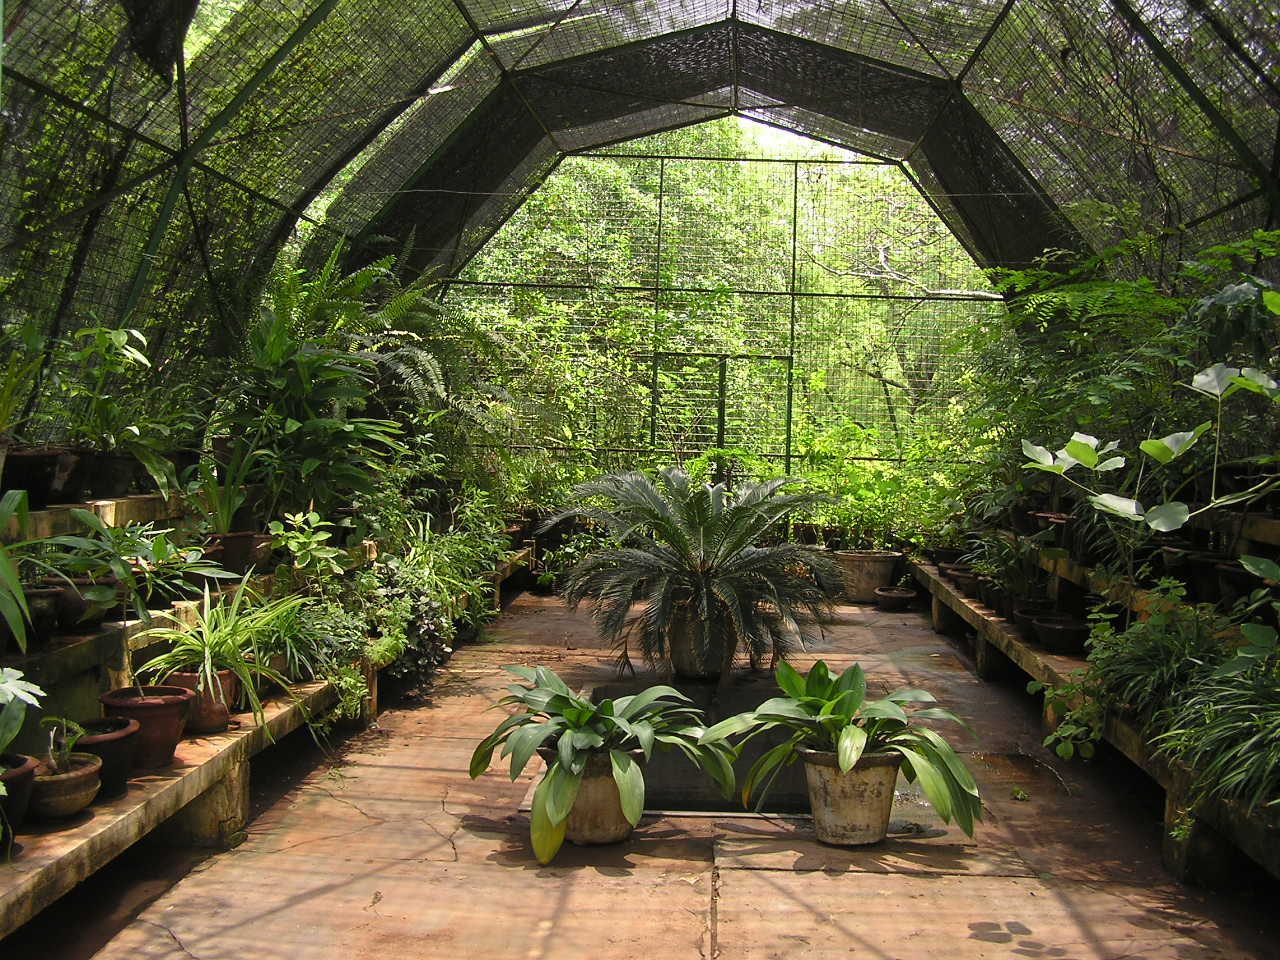 Inner view of Green house with plants